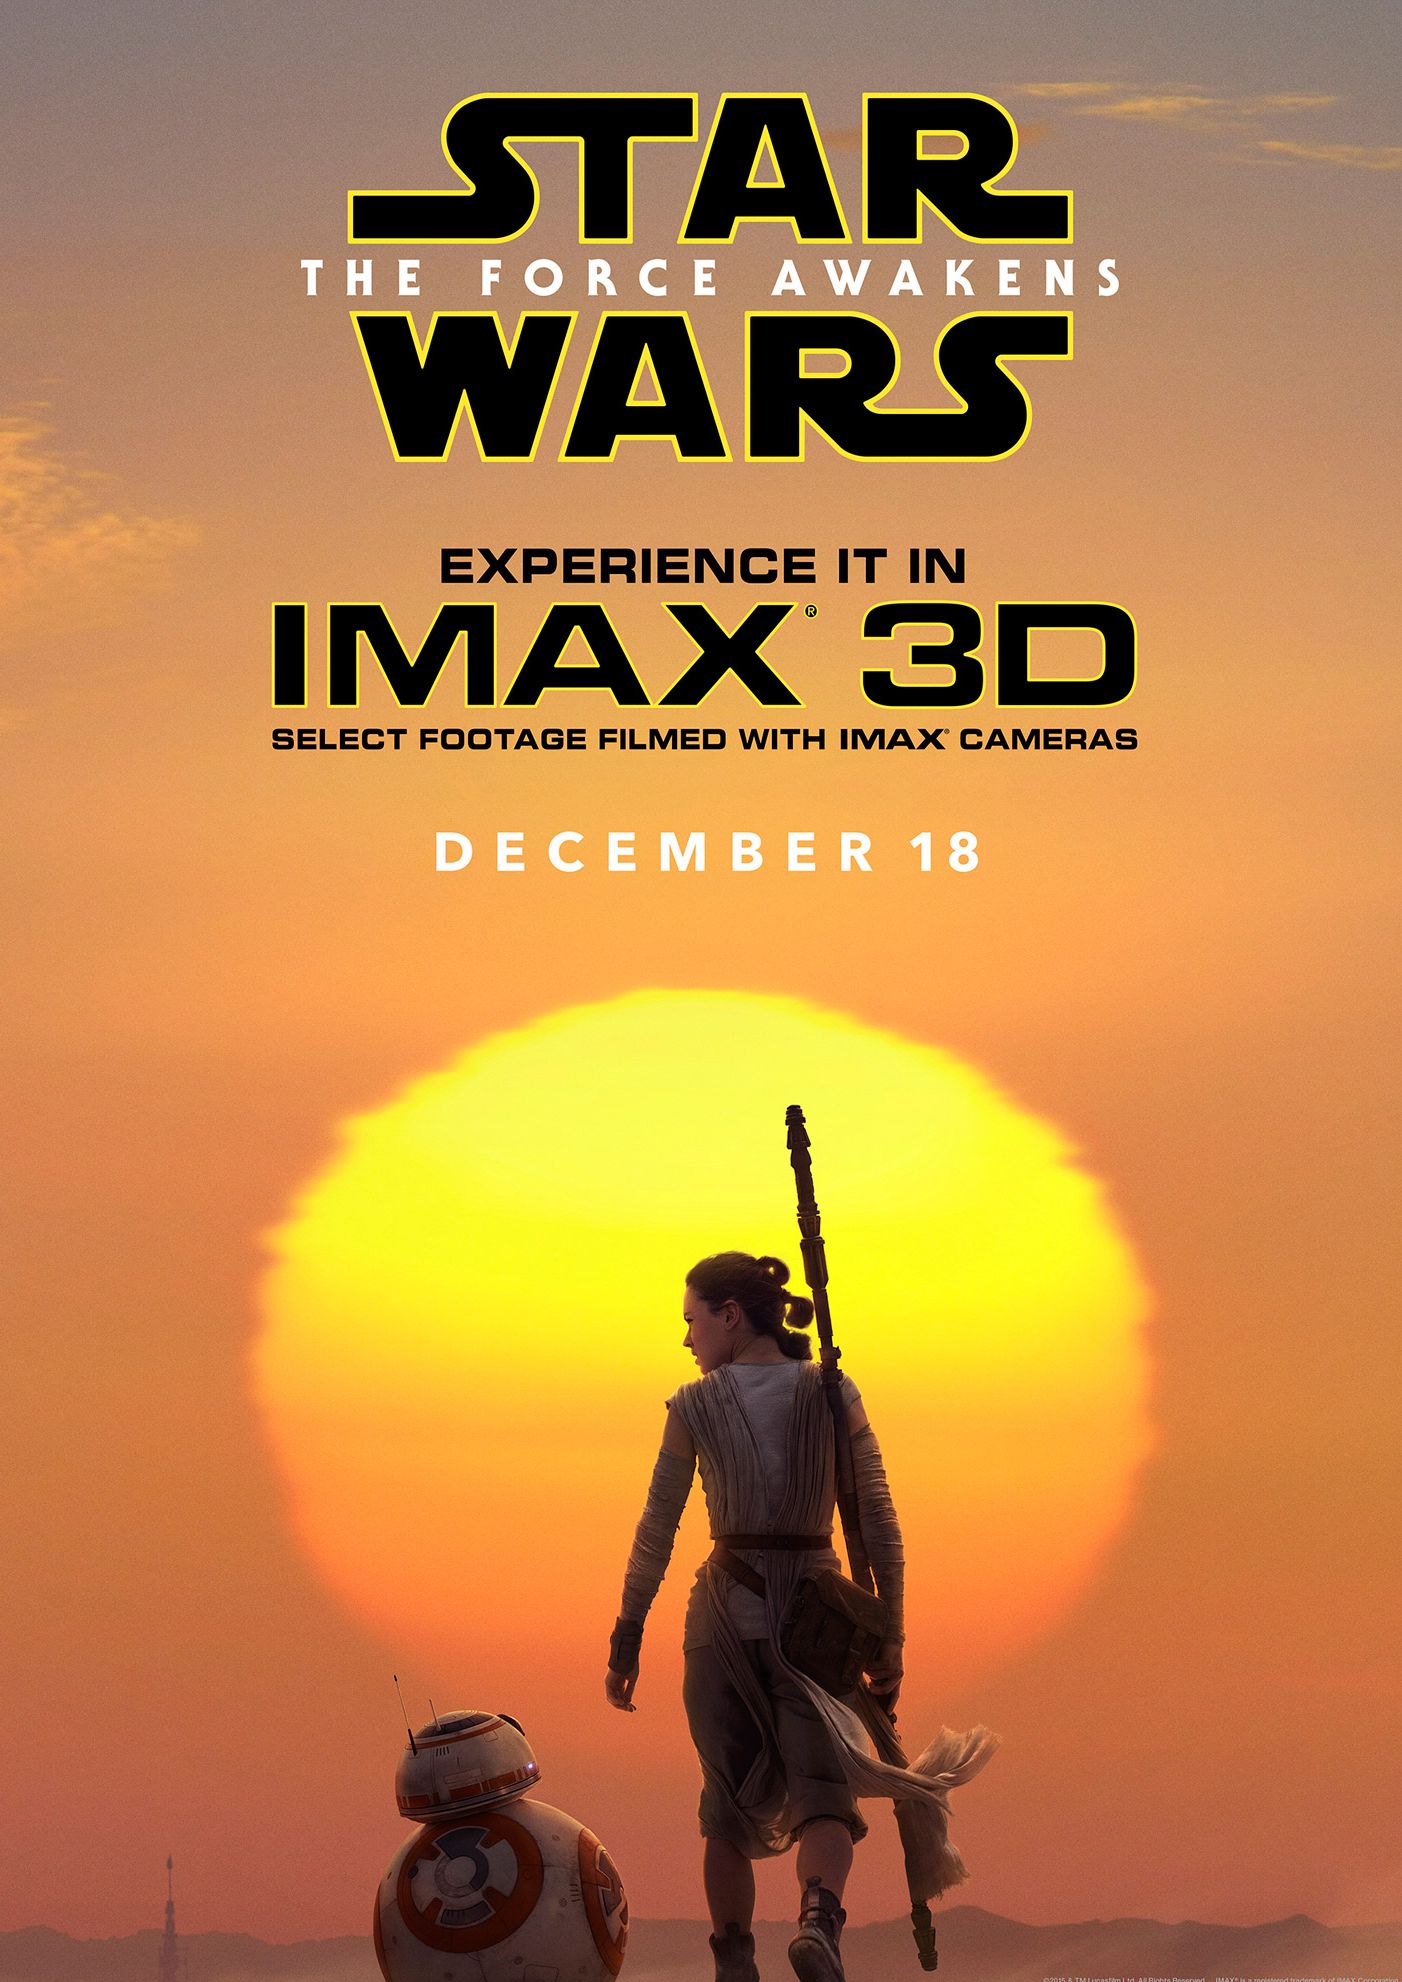 Official IMAX Poster for Star Wars: The Force Awakens